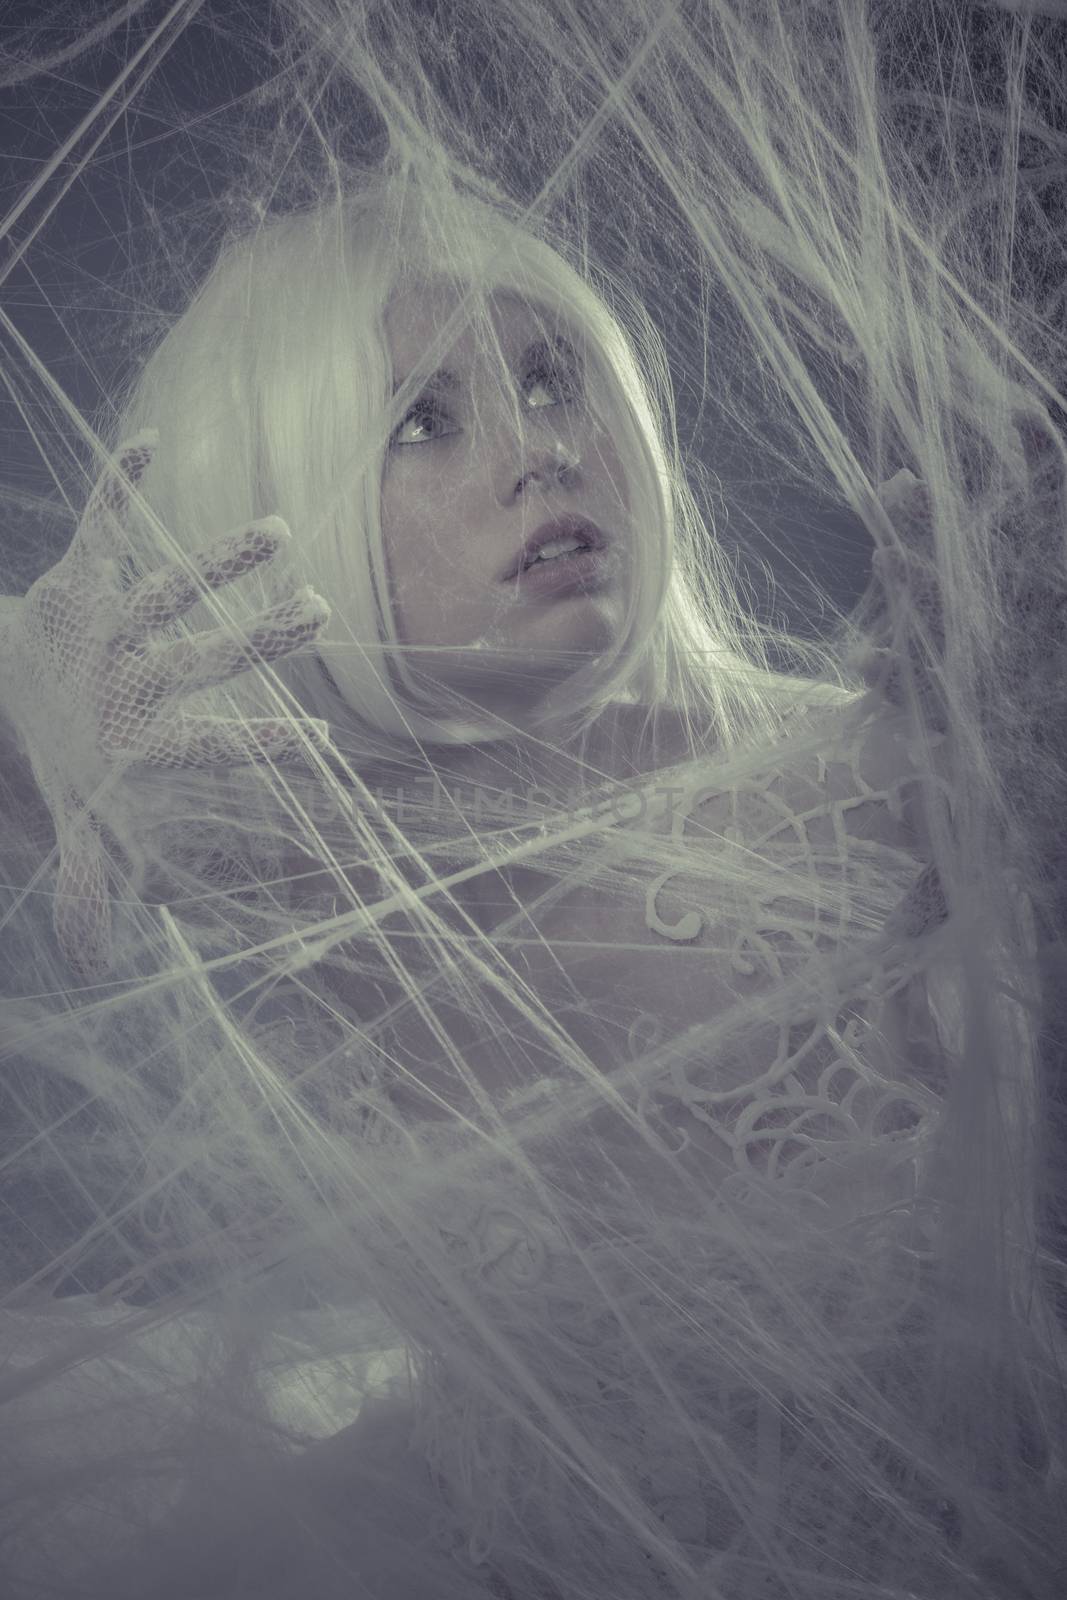 Spider web trapped, Sensual lady in white corset, long hair, handmade dress